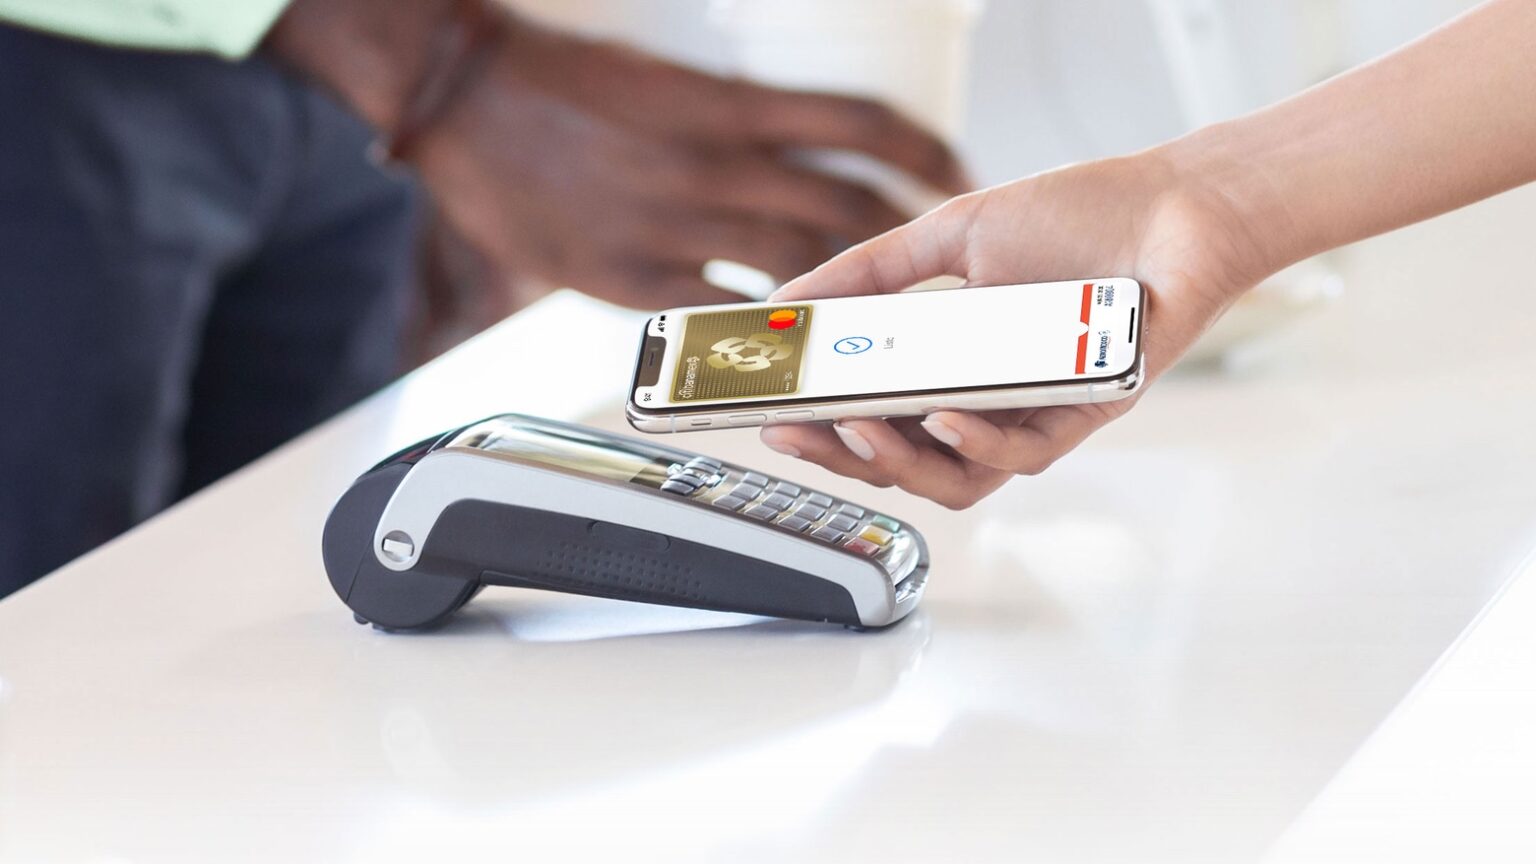 Apple Pay Tap-to-Pay